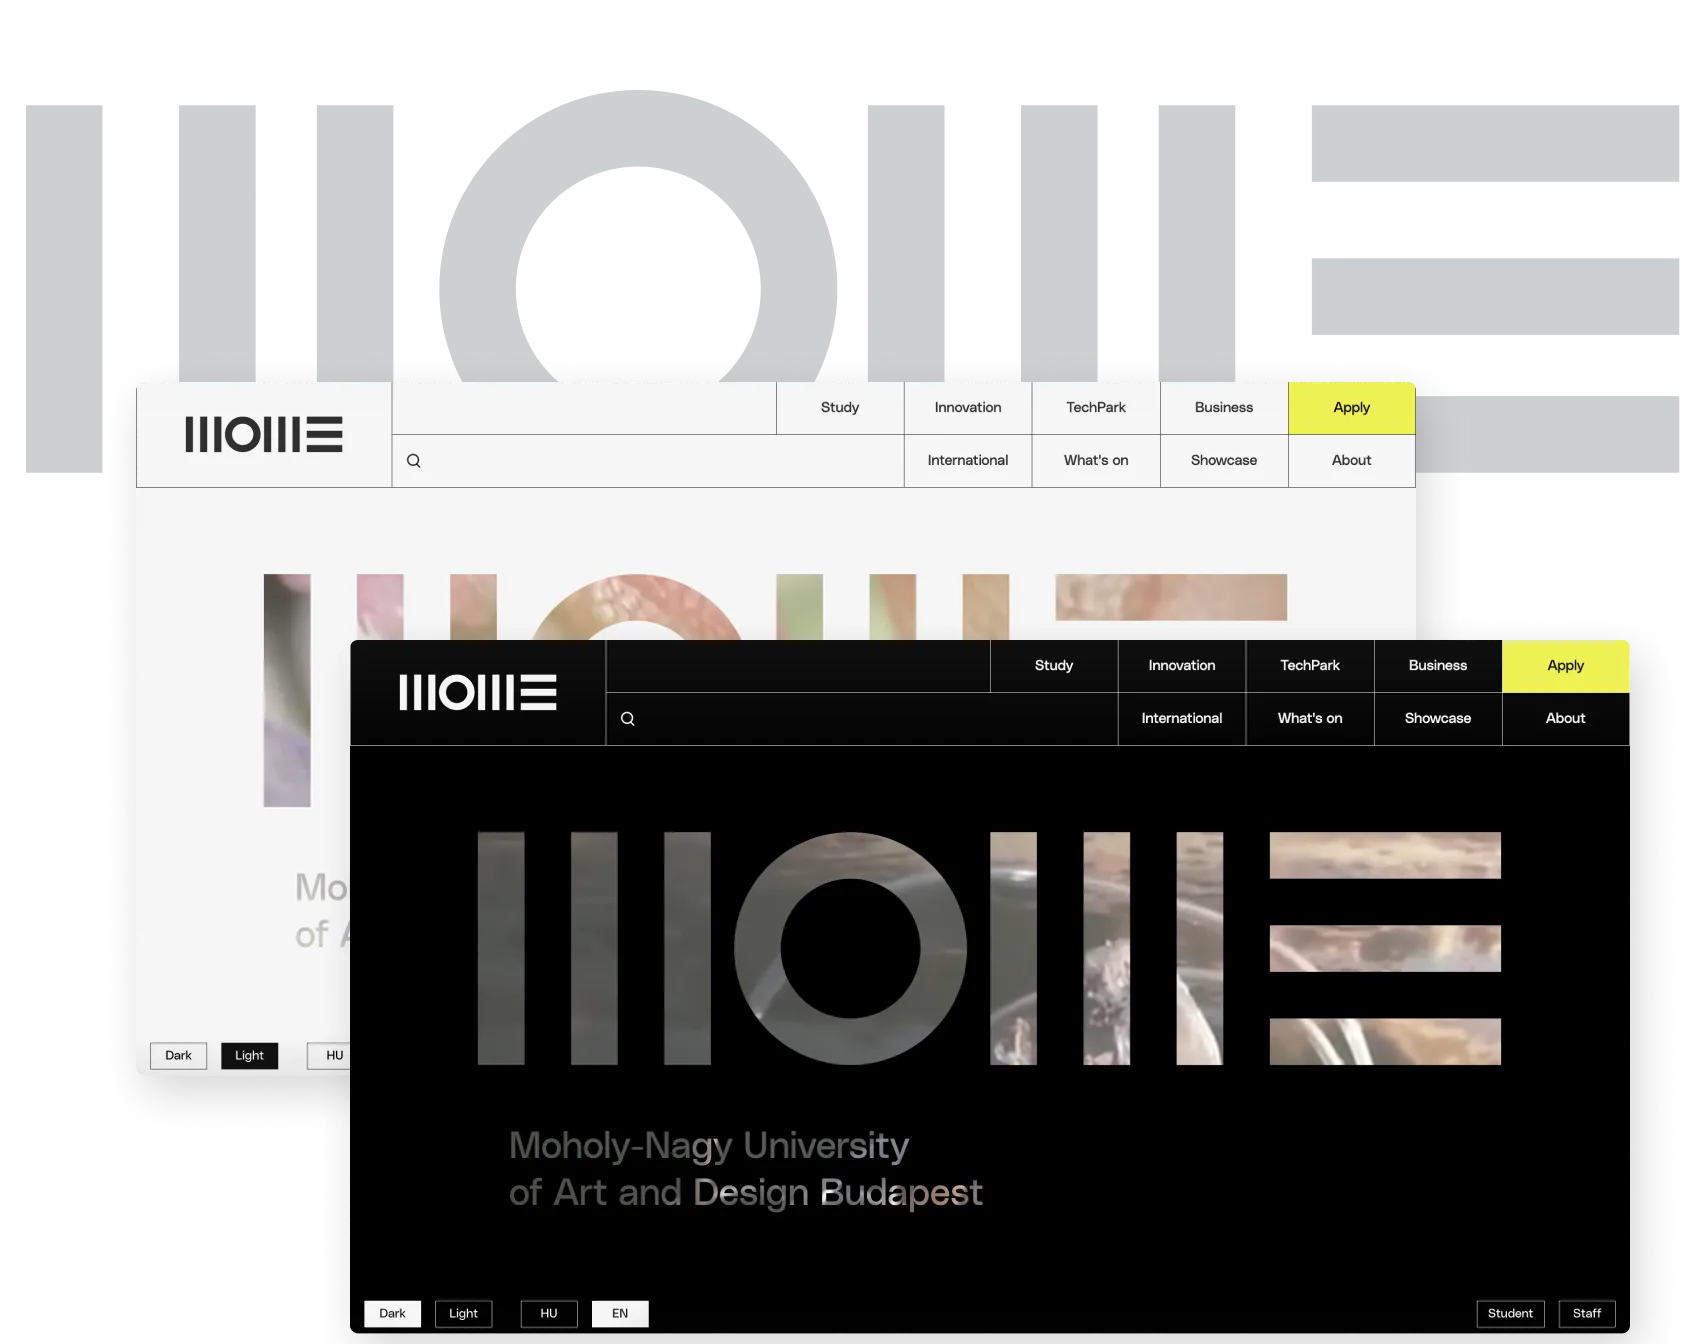 MOME's homepage in light and dark mode.